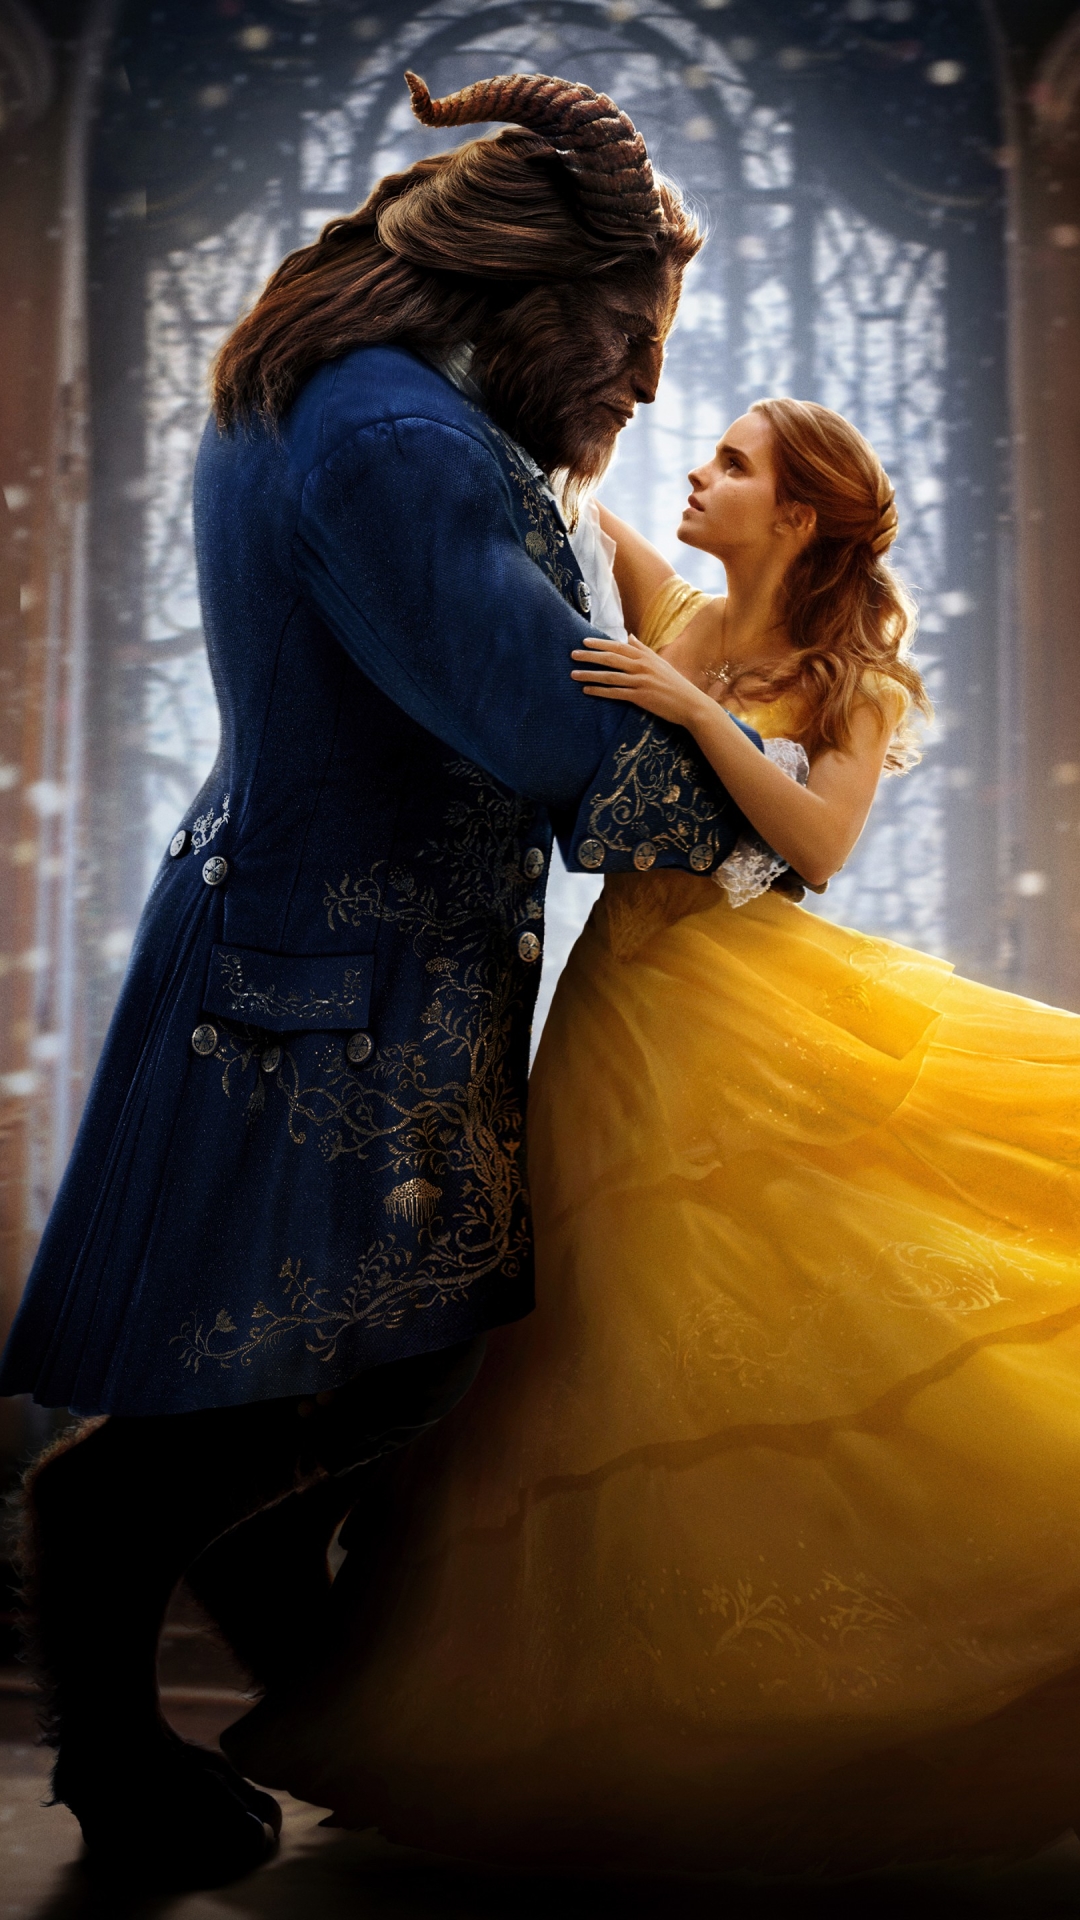 beauty and the beast wallpaper,romance,interaction,love,dress,gown